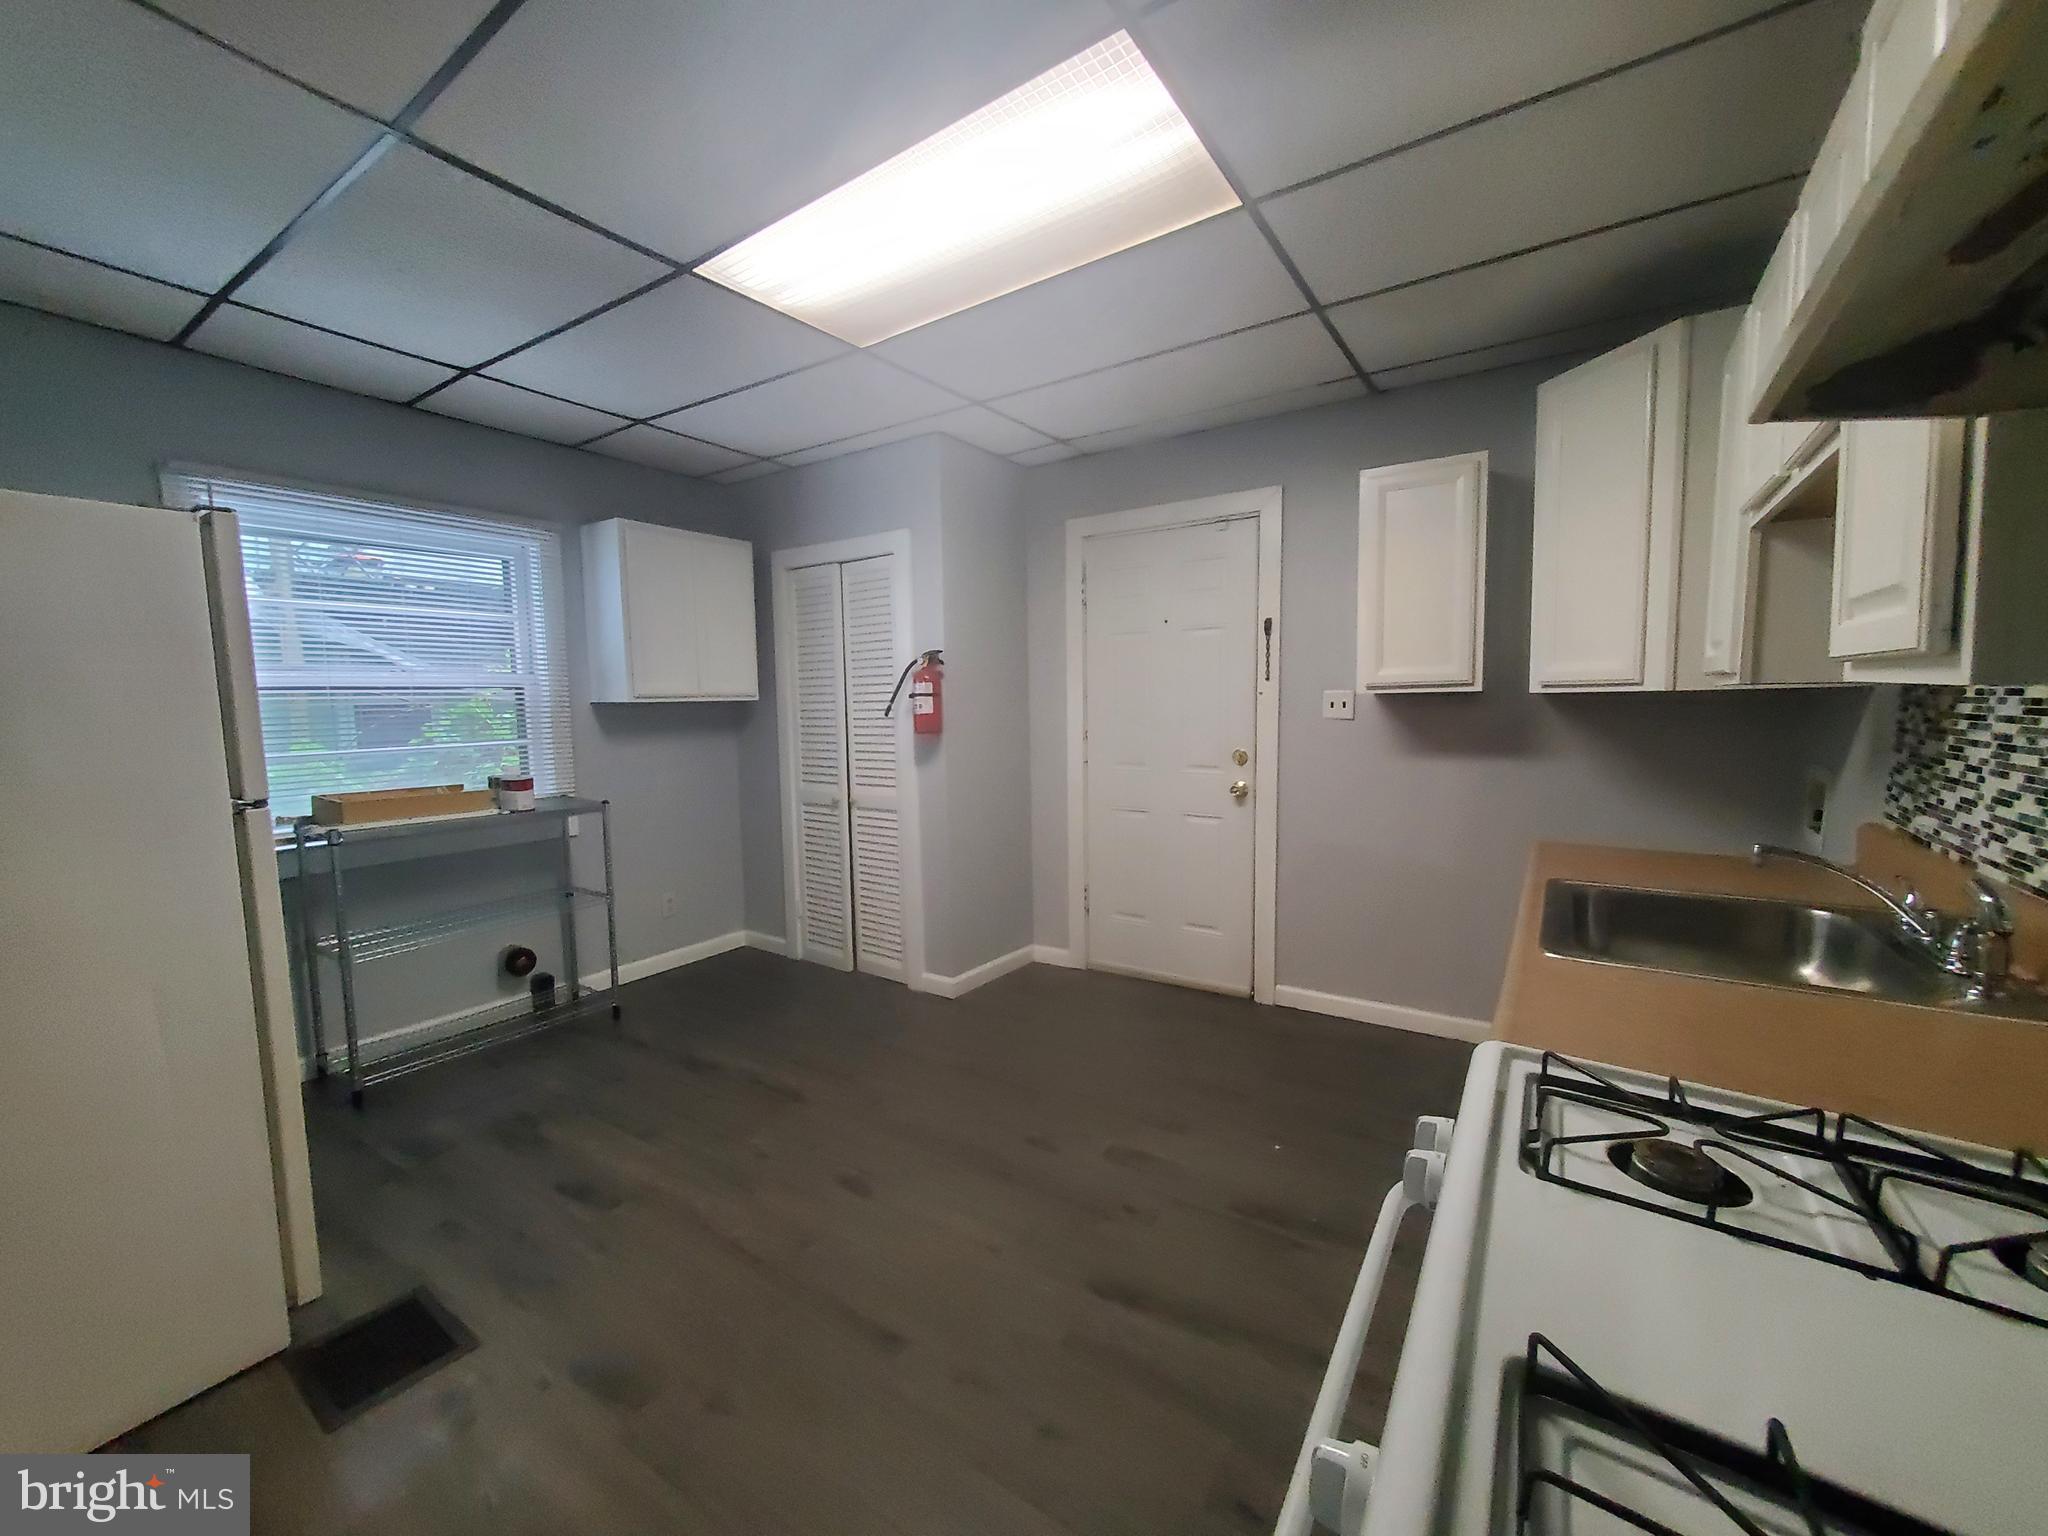 a kitchen with a stove a refrigerator and cabinets